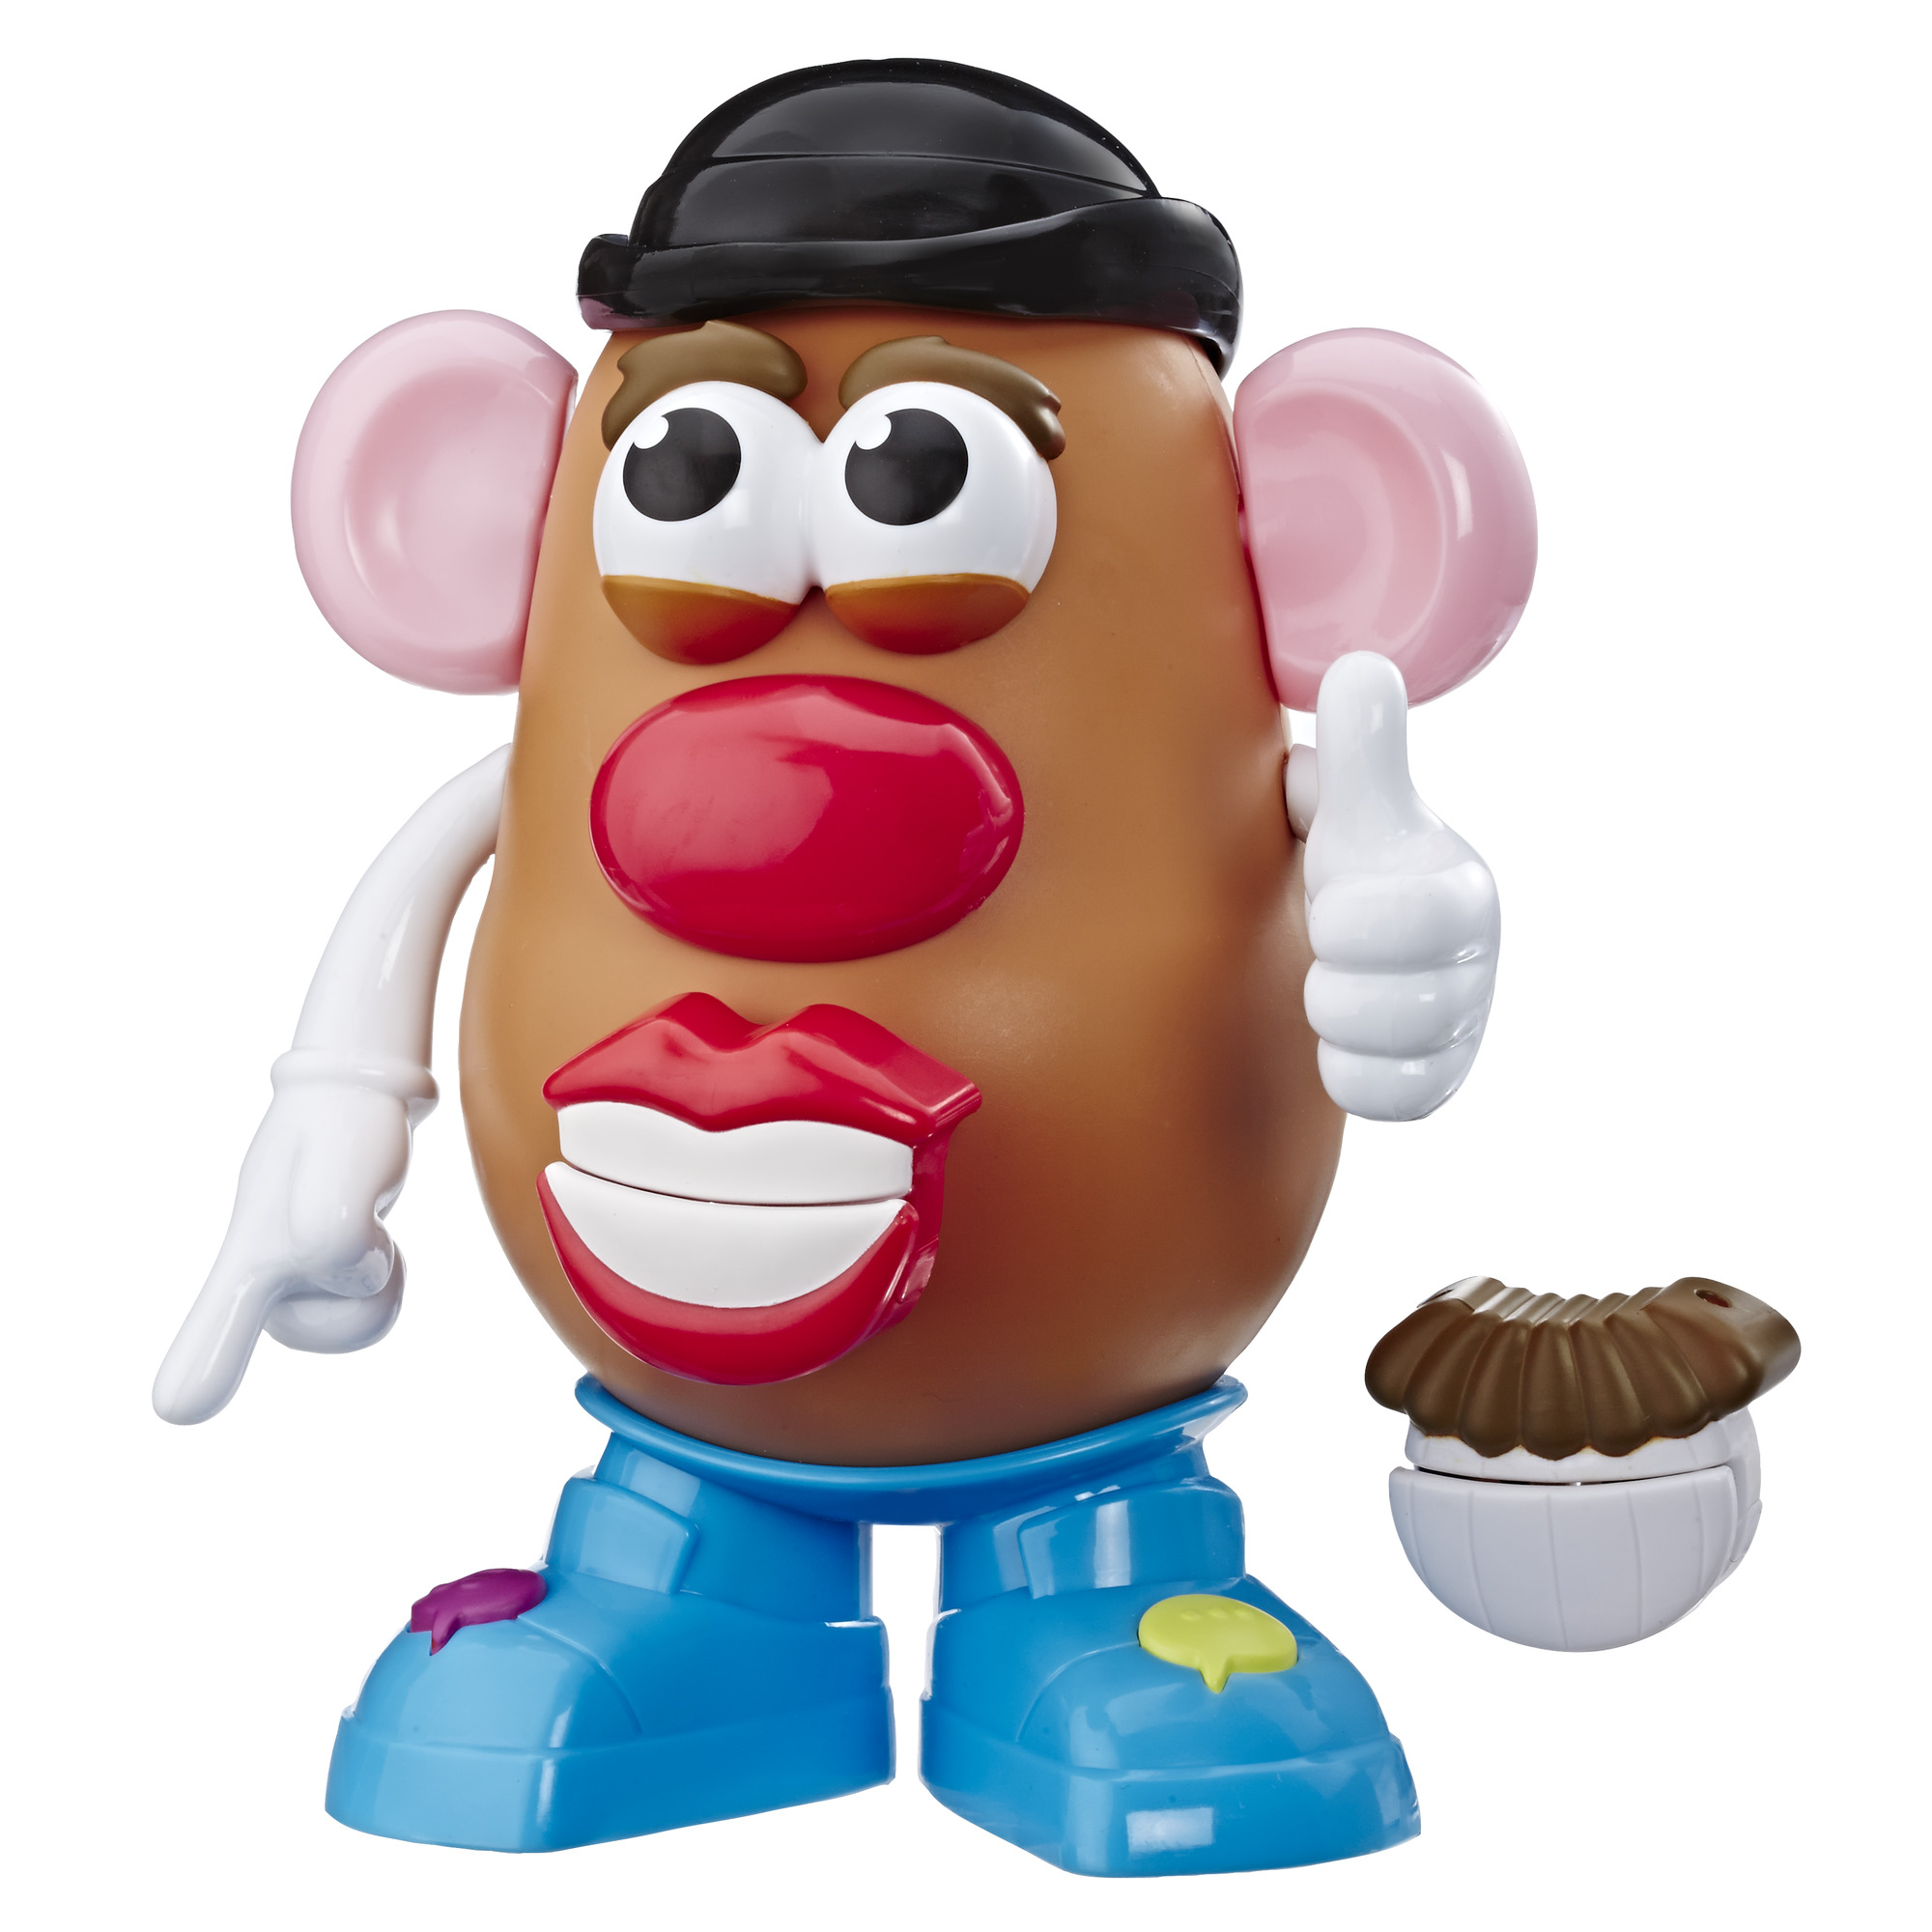 Mr. Potato Head Movin' Lips Electronic Interactive Talking Toy - image 1 of 14